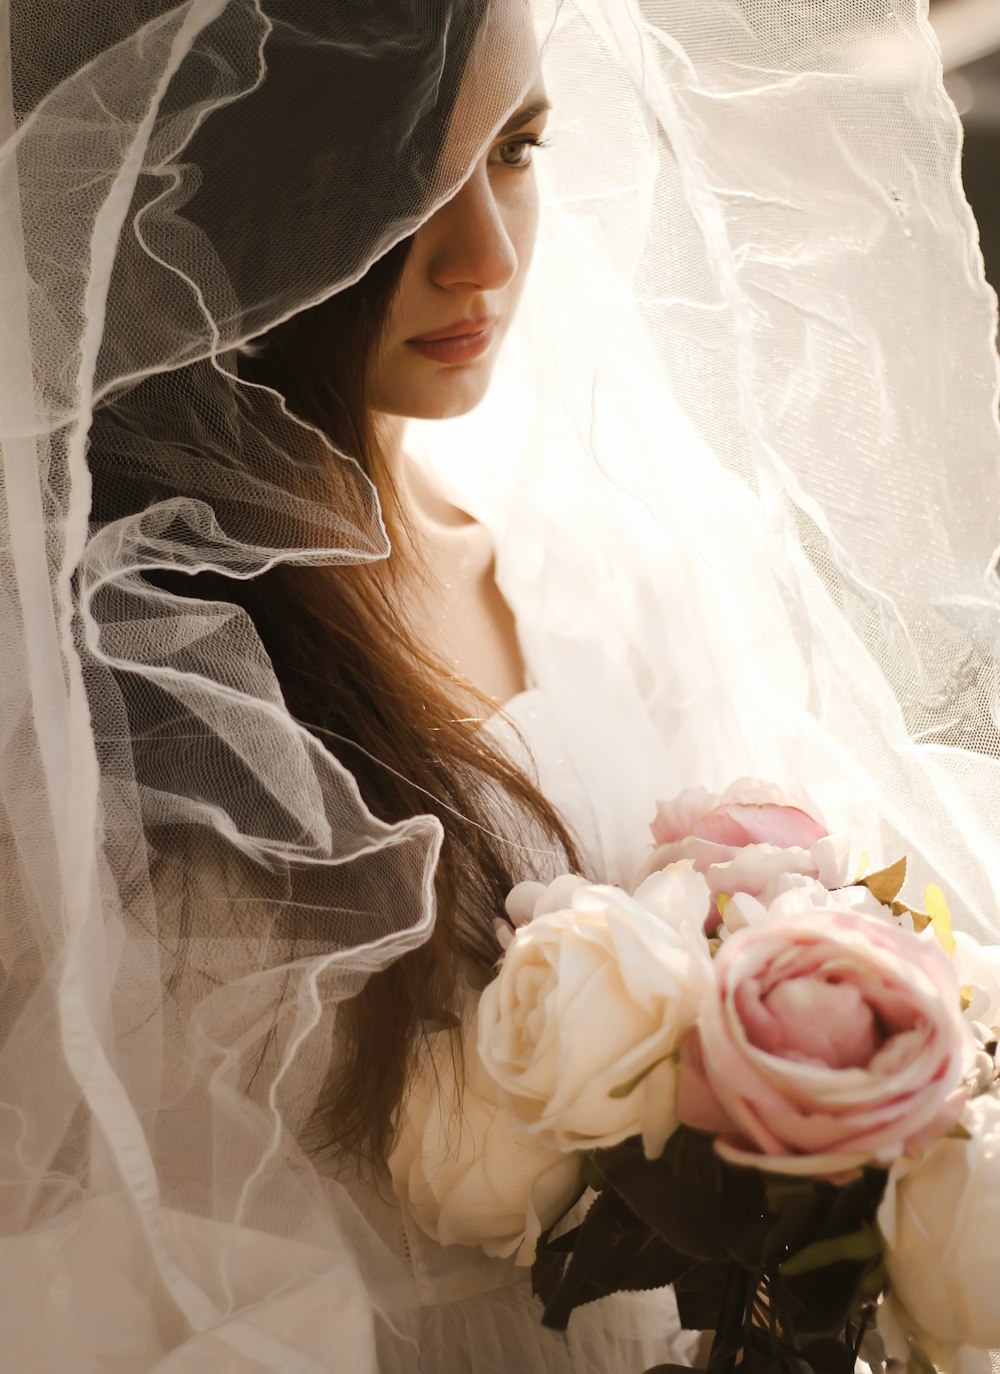 woman wearing wedding gown holding bouquet of flowers